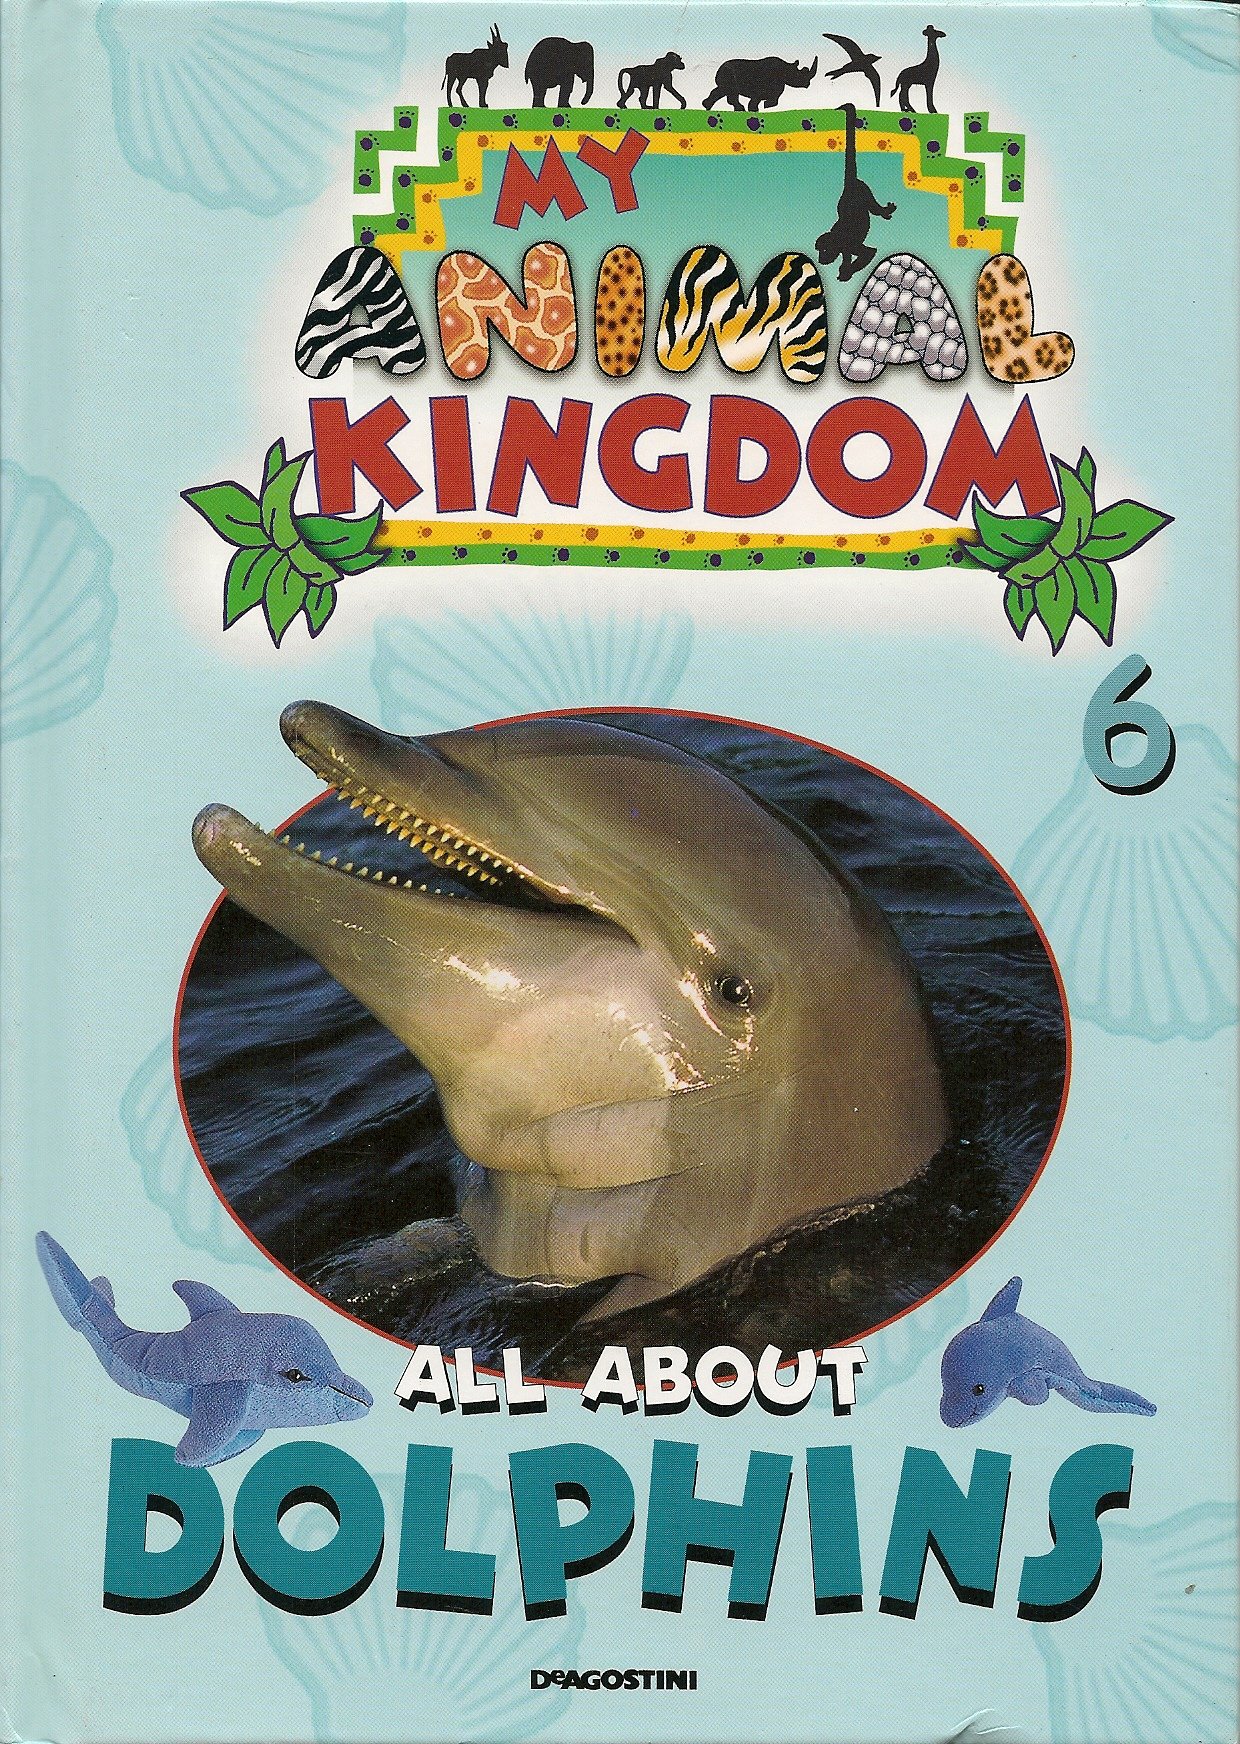 IMG : My animal kingdom All about Dolphins